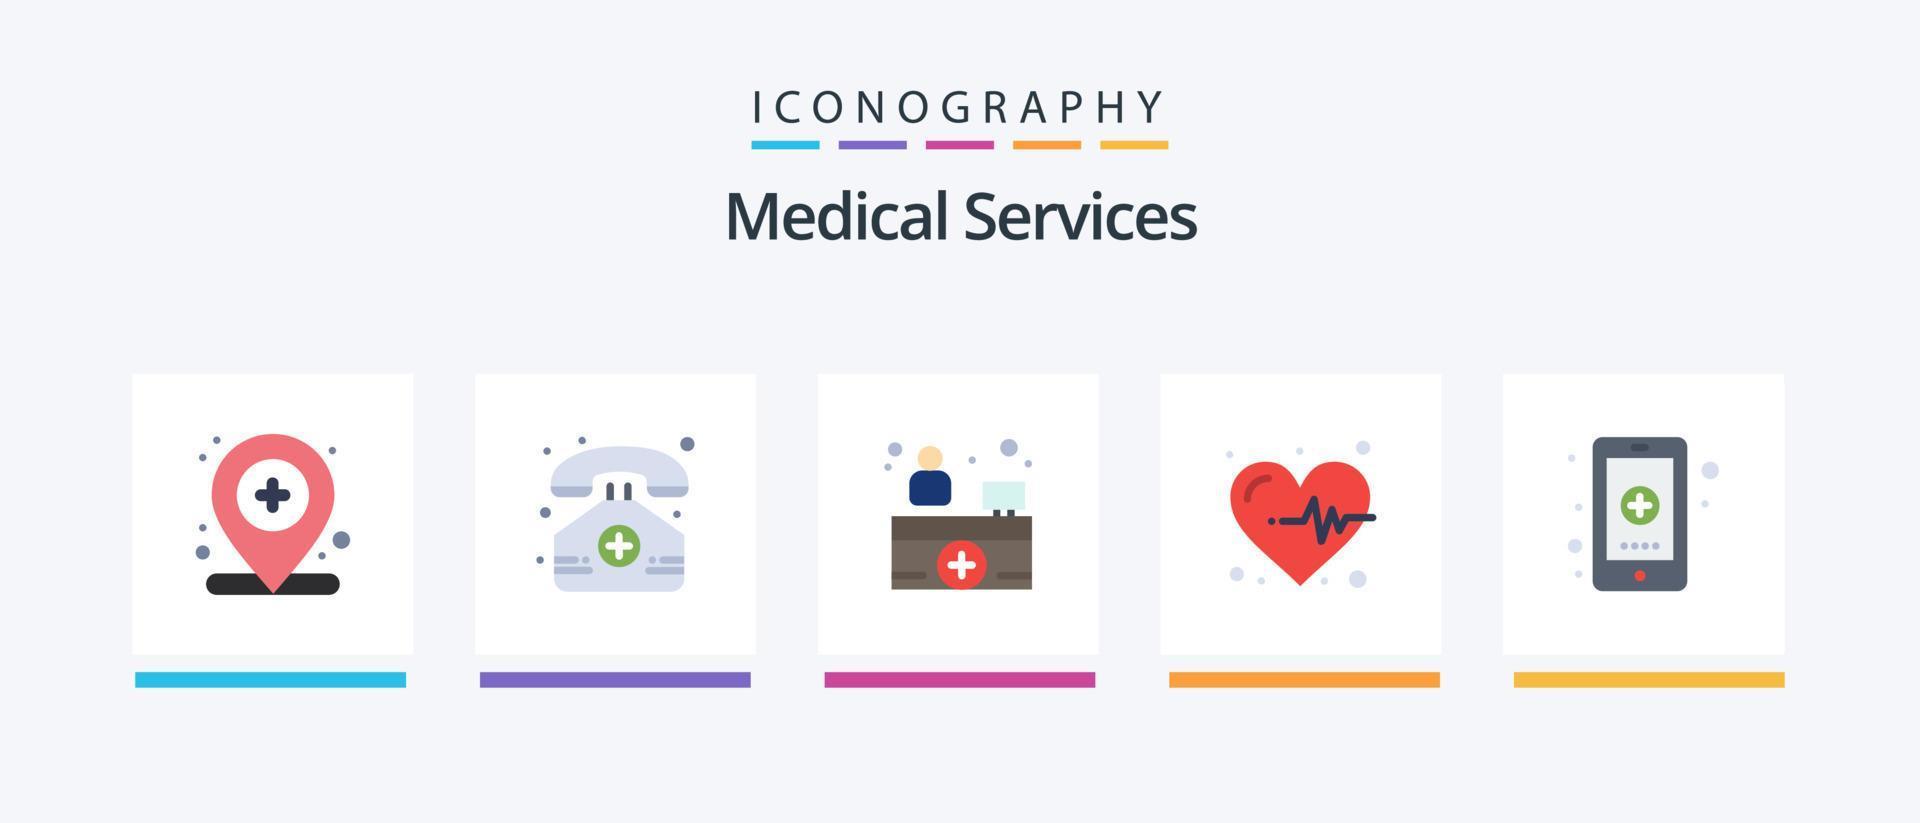 Medical Services Flat 5 Icon Pack Including medical. health. hospital reception. app. heart. Creative Icons Design vector